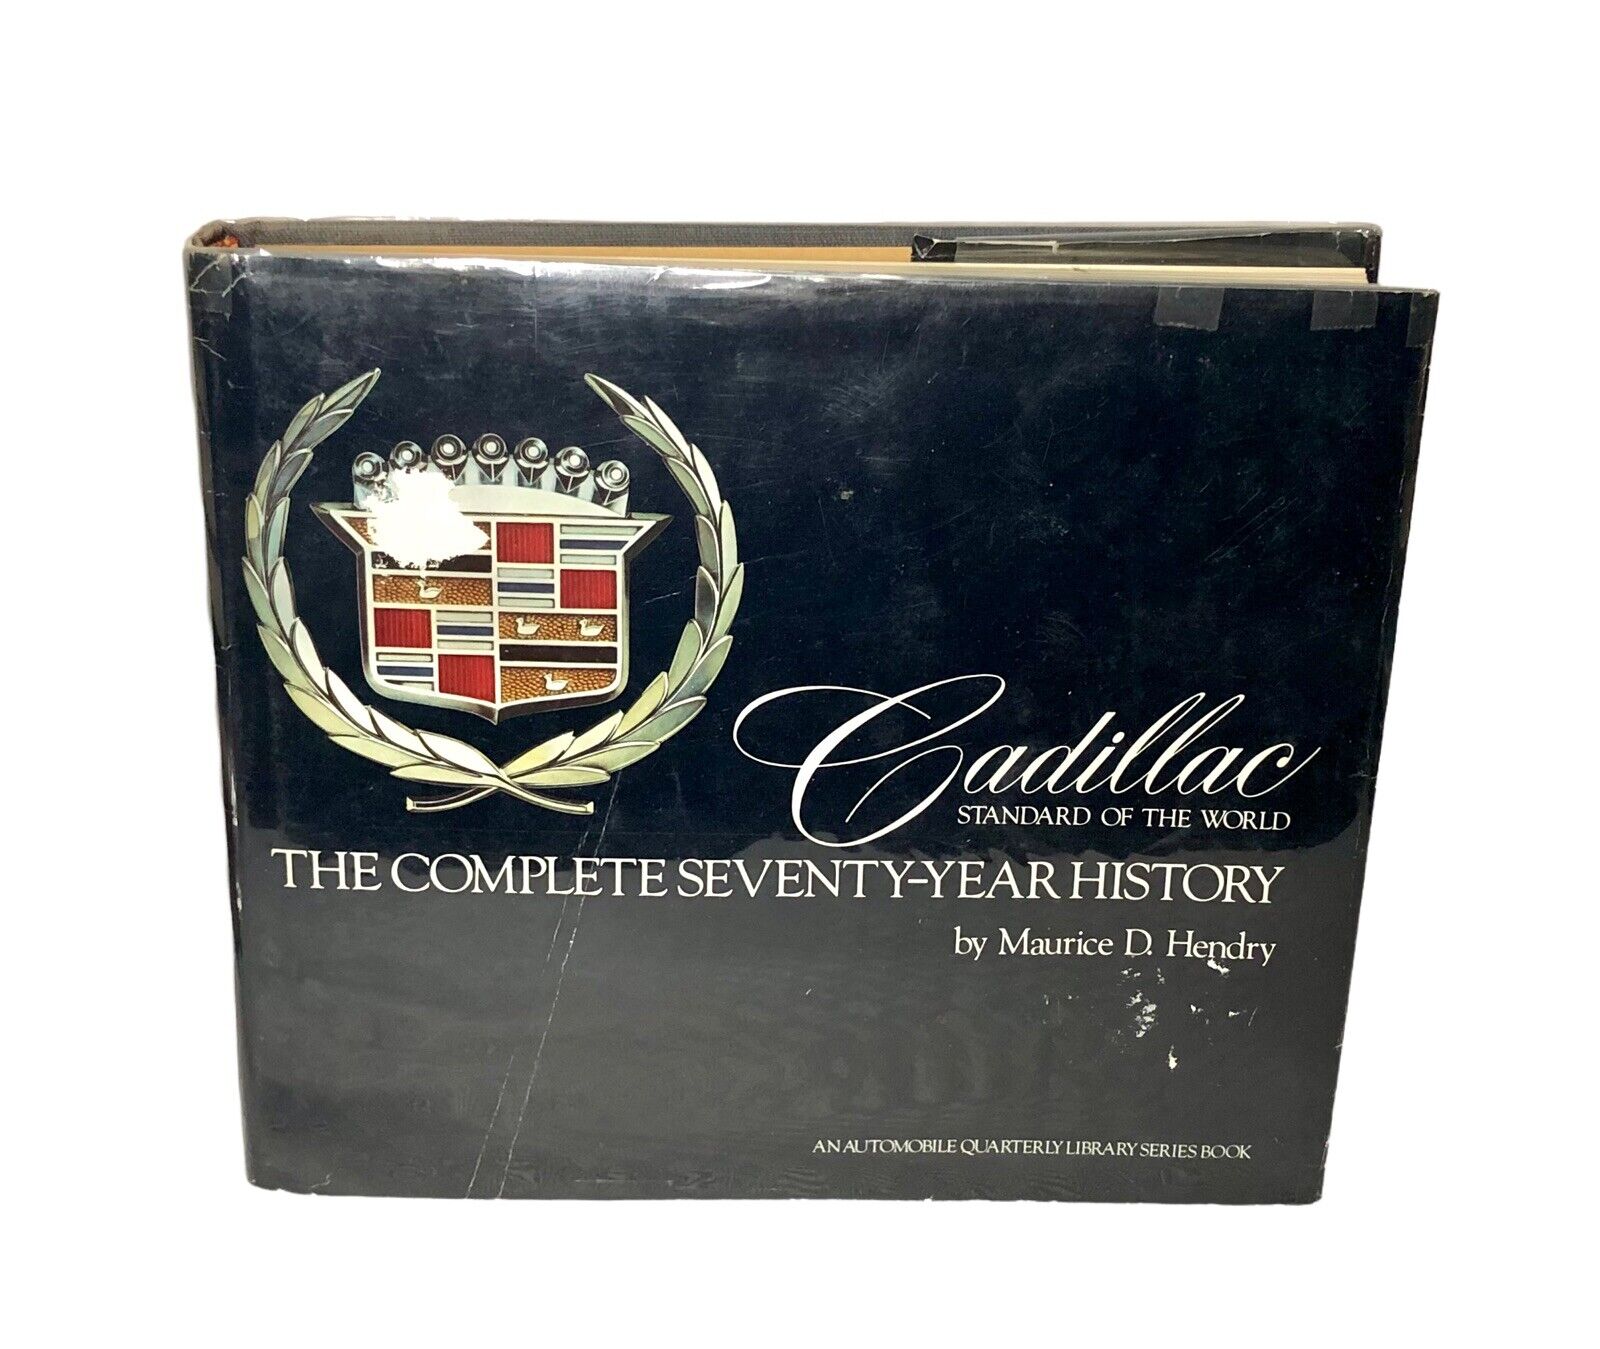 Vtg 1973 Cadillac The Complete Seventy Year History Hendry First Ed 2nd Print